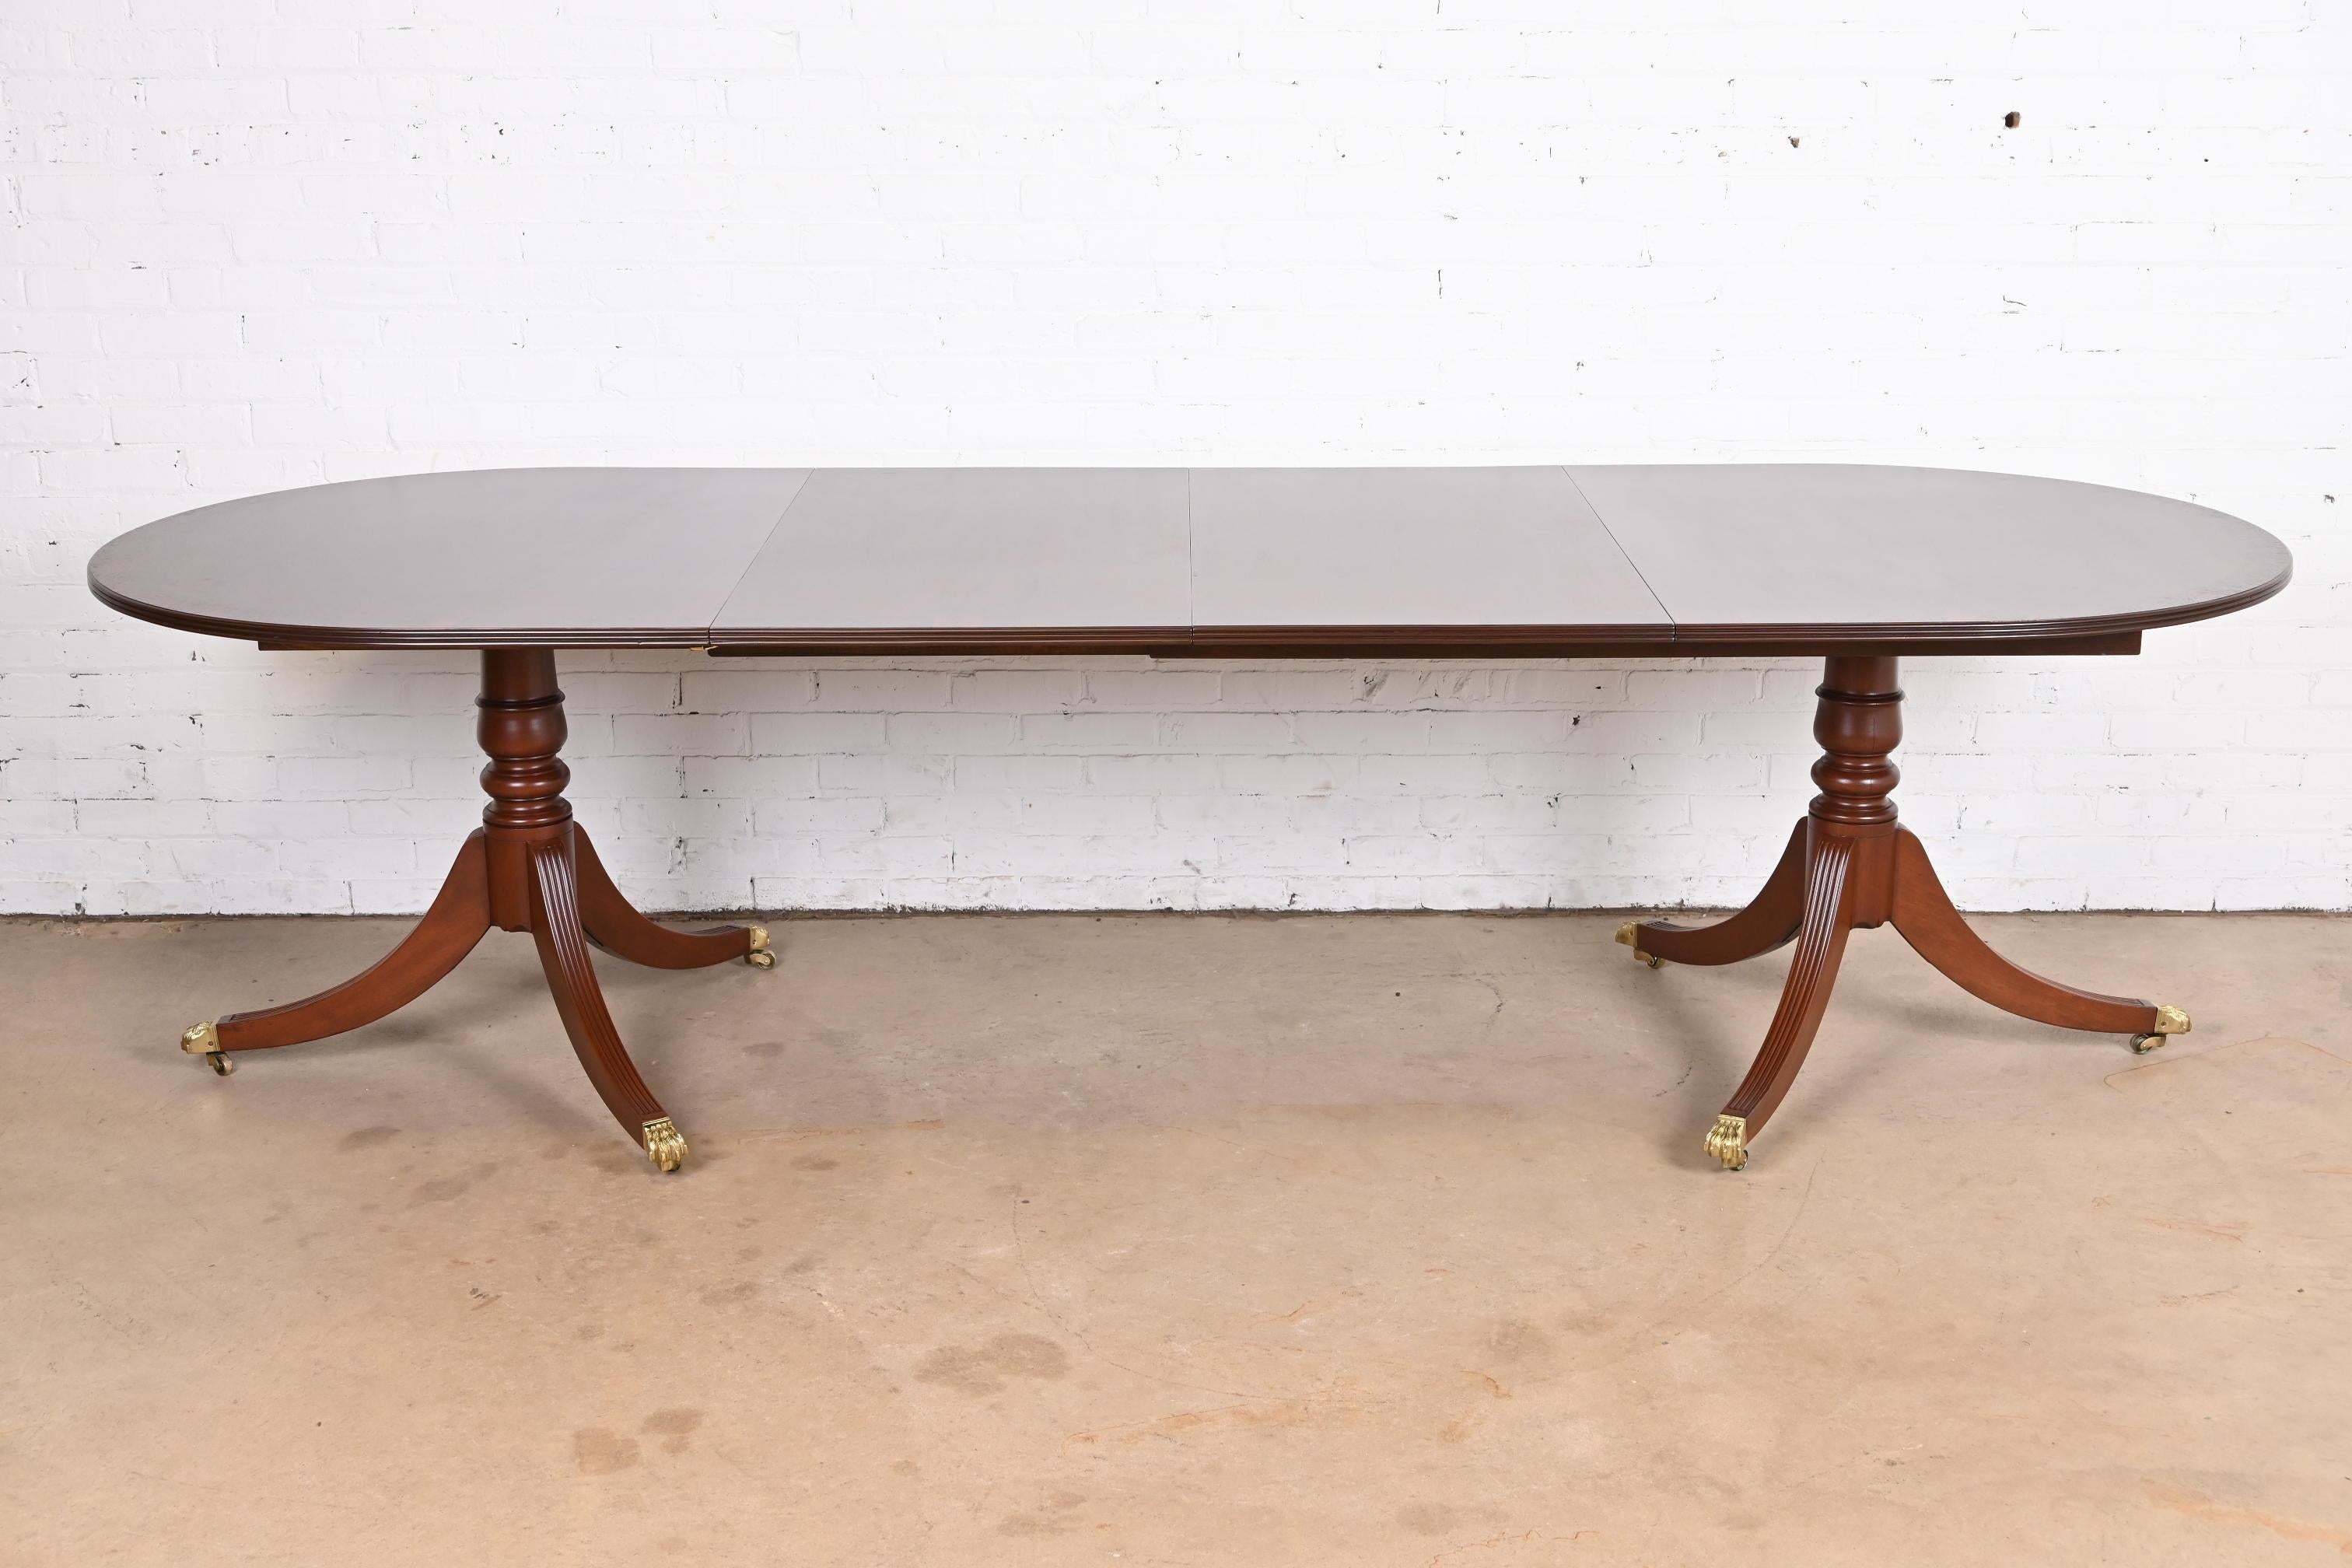 An exceptional Georgian or Regency style double pedestal extension dining table

In the manner of Henkel Harris

USA, Circa 1960s

Gorgeous mahogany, with rosewood banding, carved mahogany pedestals, and brass-capped paw feet on casters.

Measures: